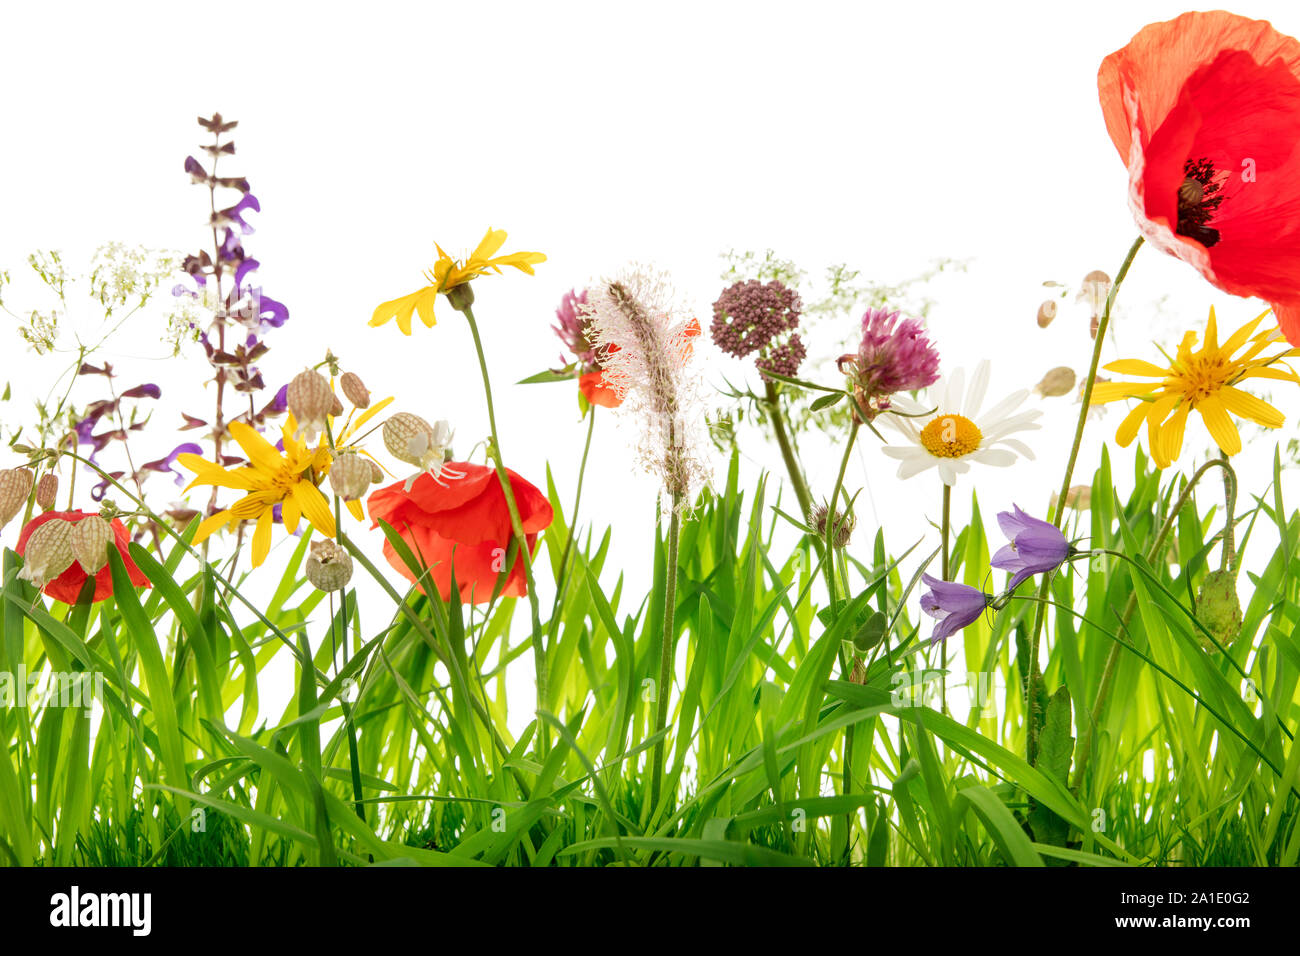 Closeup, wildflower meadow with poppies, arnica montana, clover and margerite, white background Stock Photo